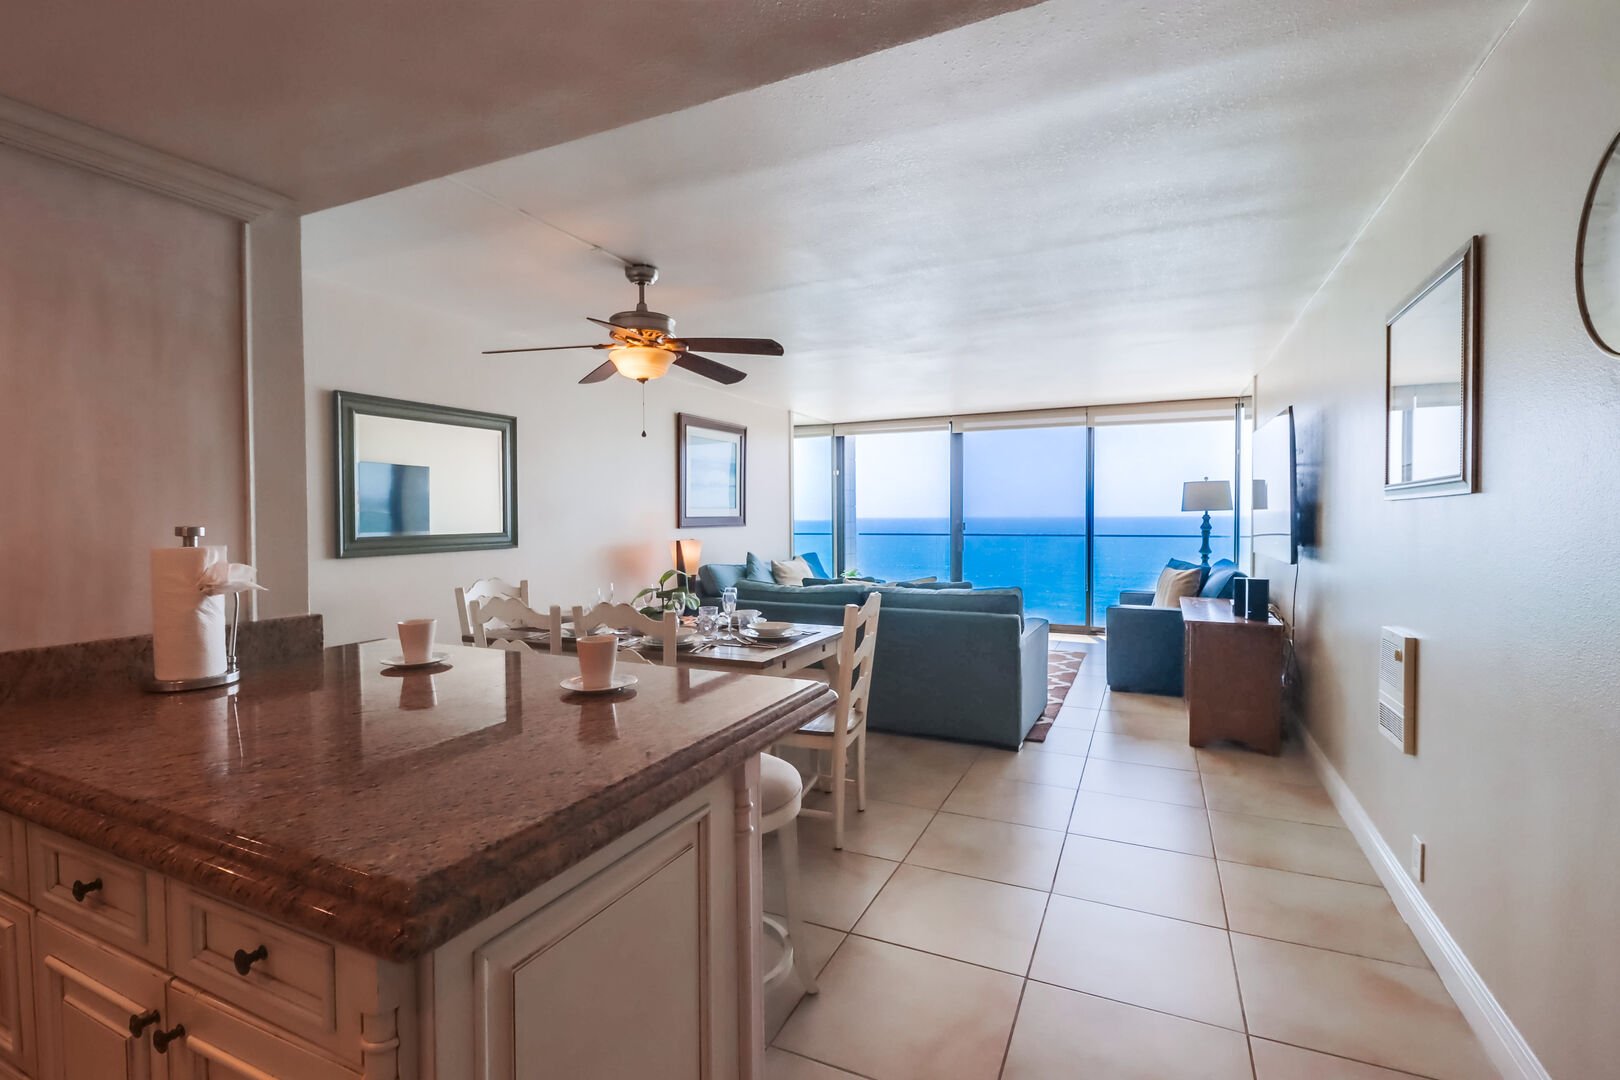 Cooking, dining and relaxing with an incredible ocean view!